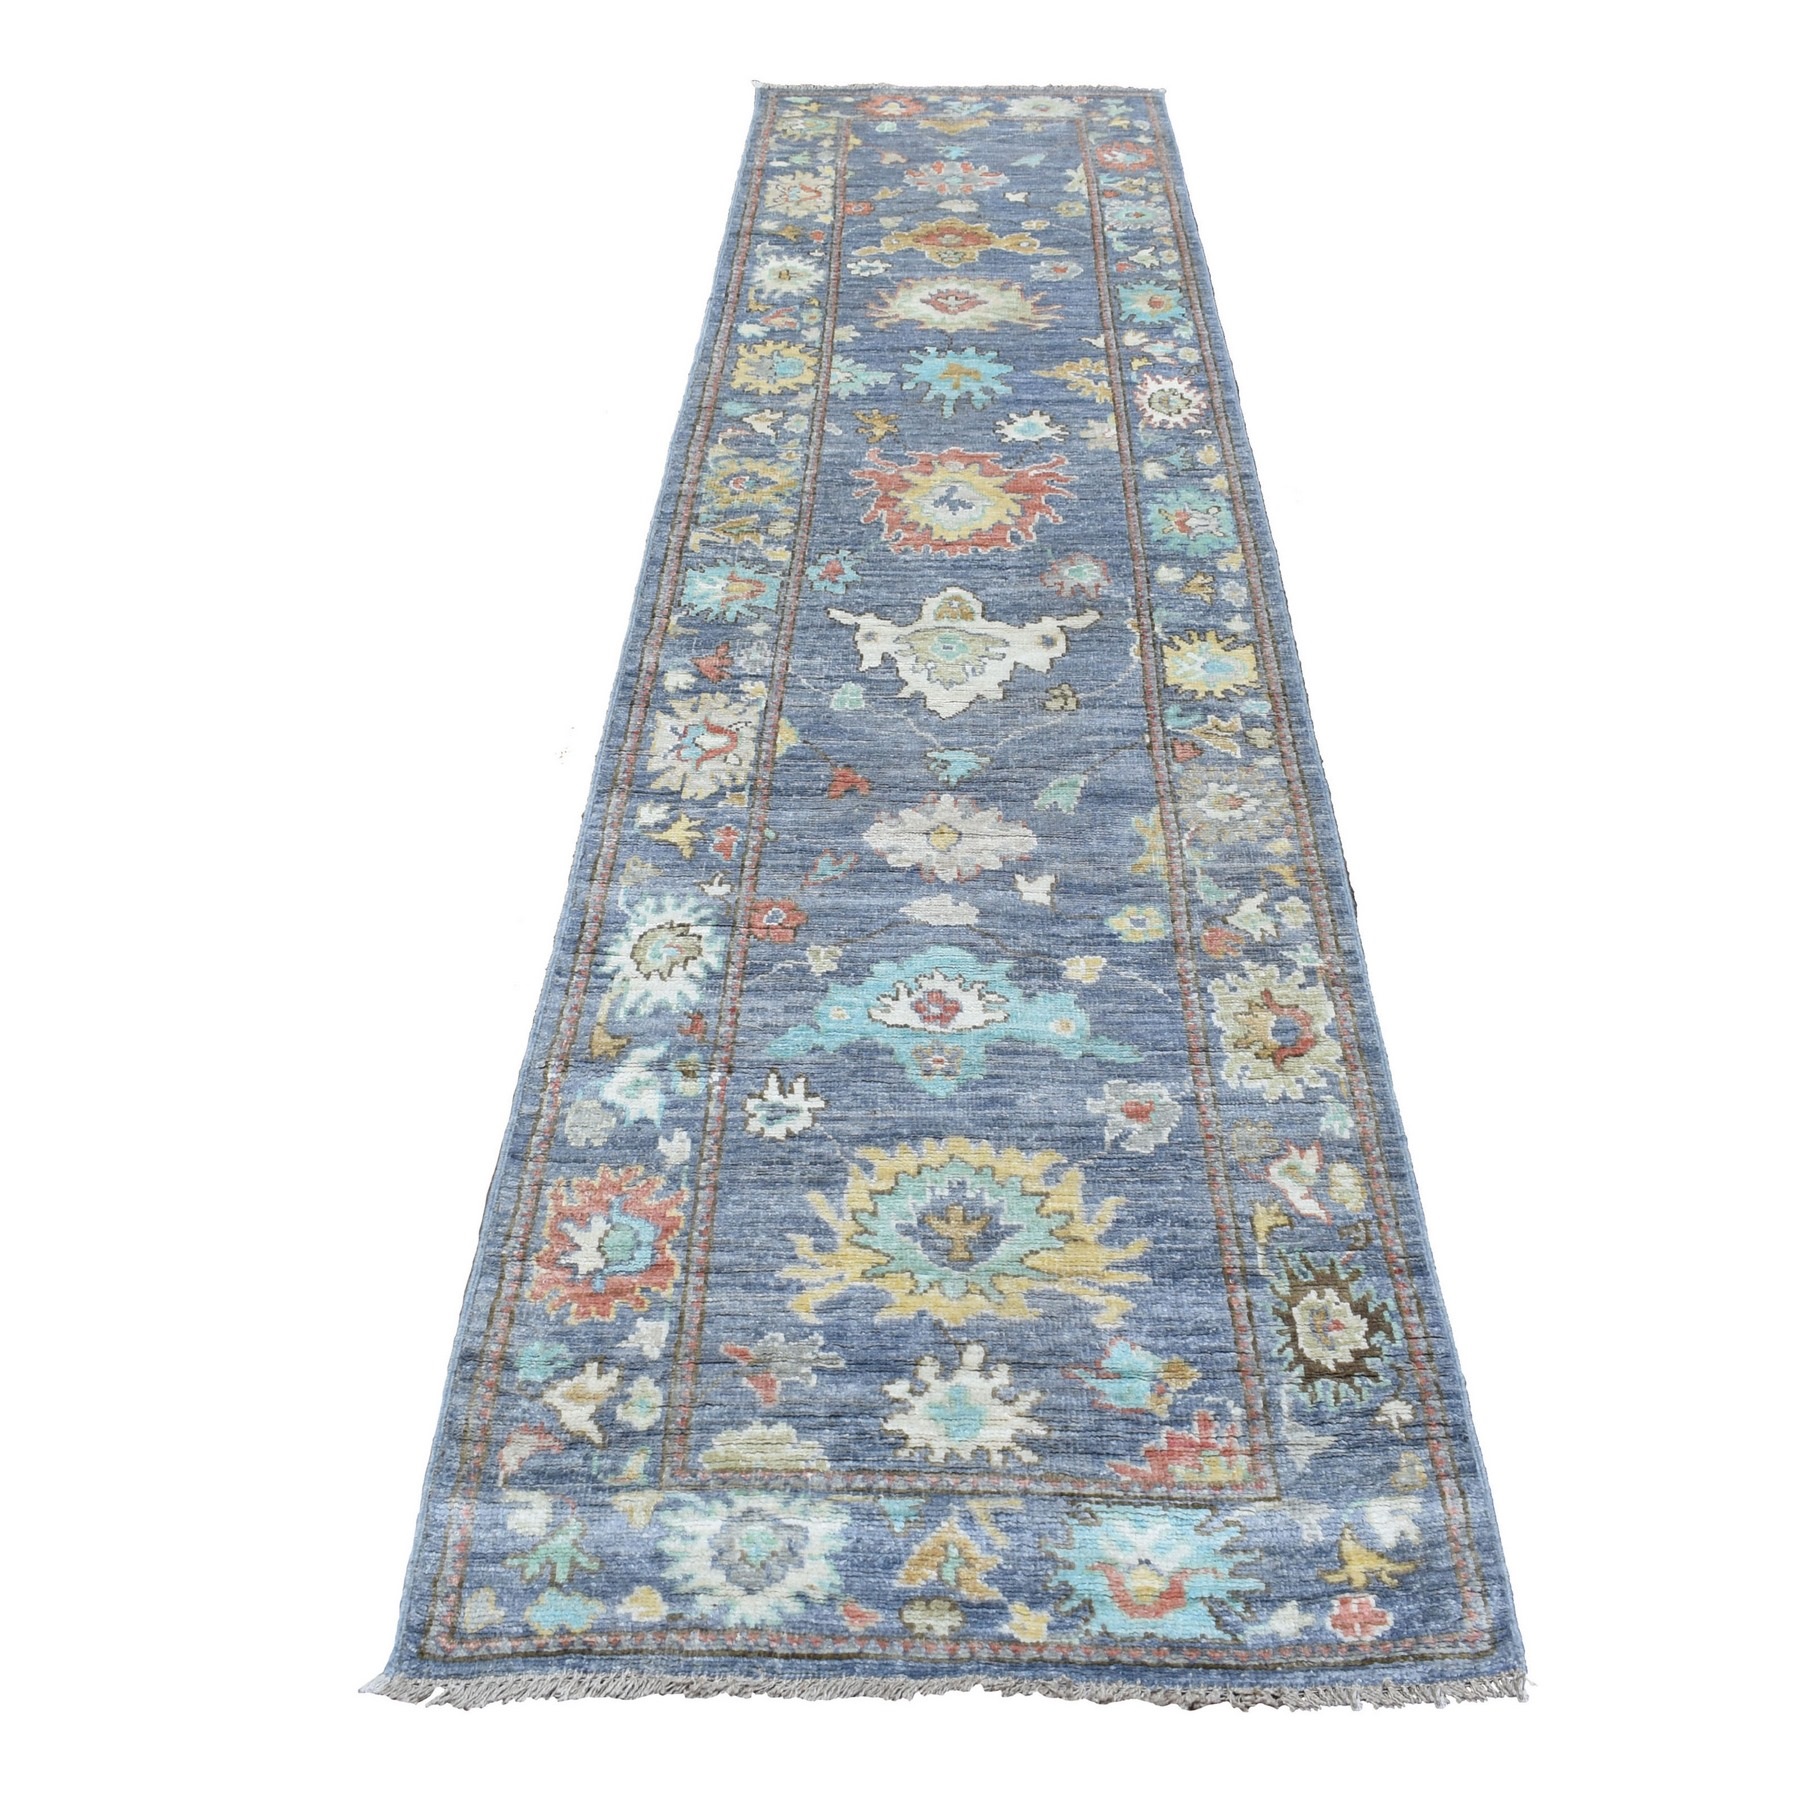 2'9"x11'1" Denim Blue Angora Oushak With Large Colorful Motifs Hand Woven Afghan Wool Oriental Runner Rug 